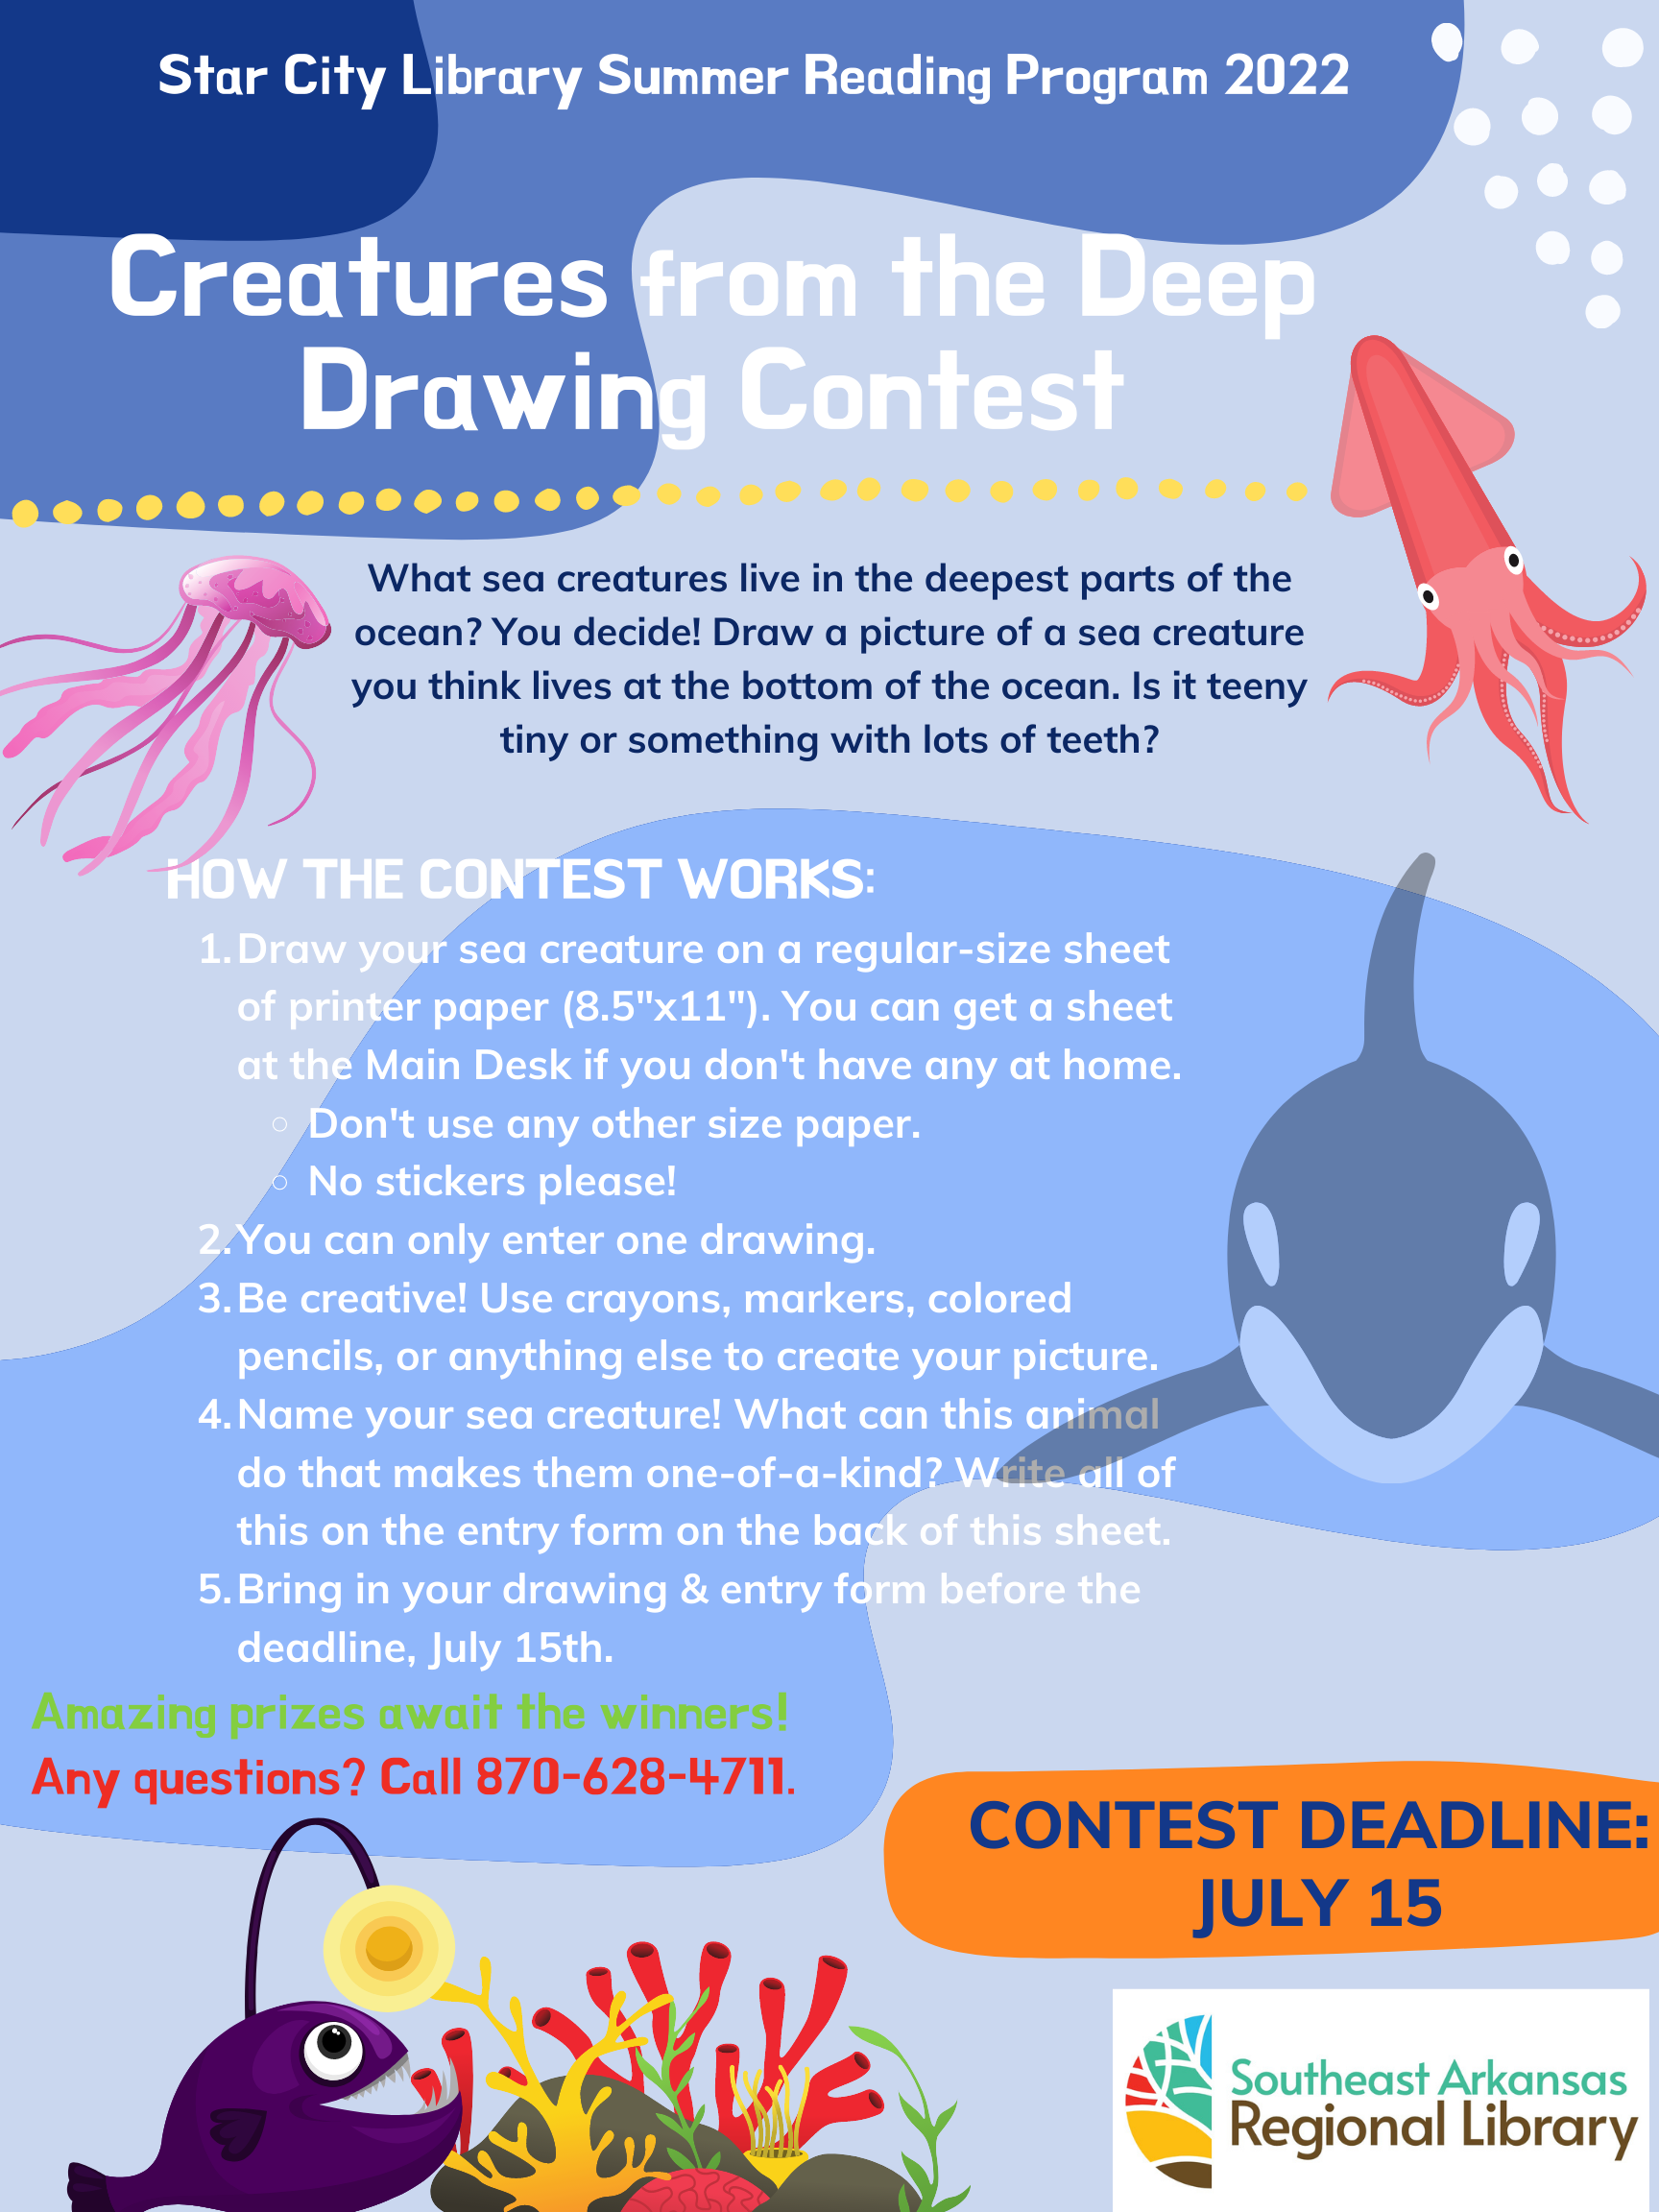 Drawing contest info with deadline & contest rules.